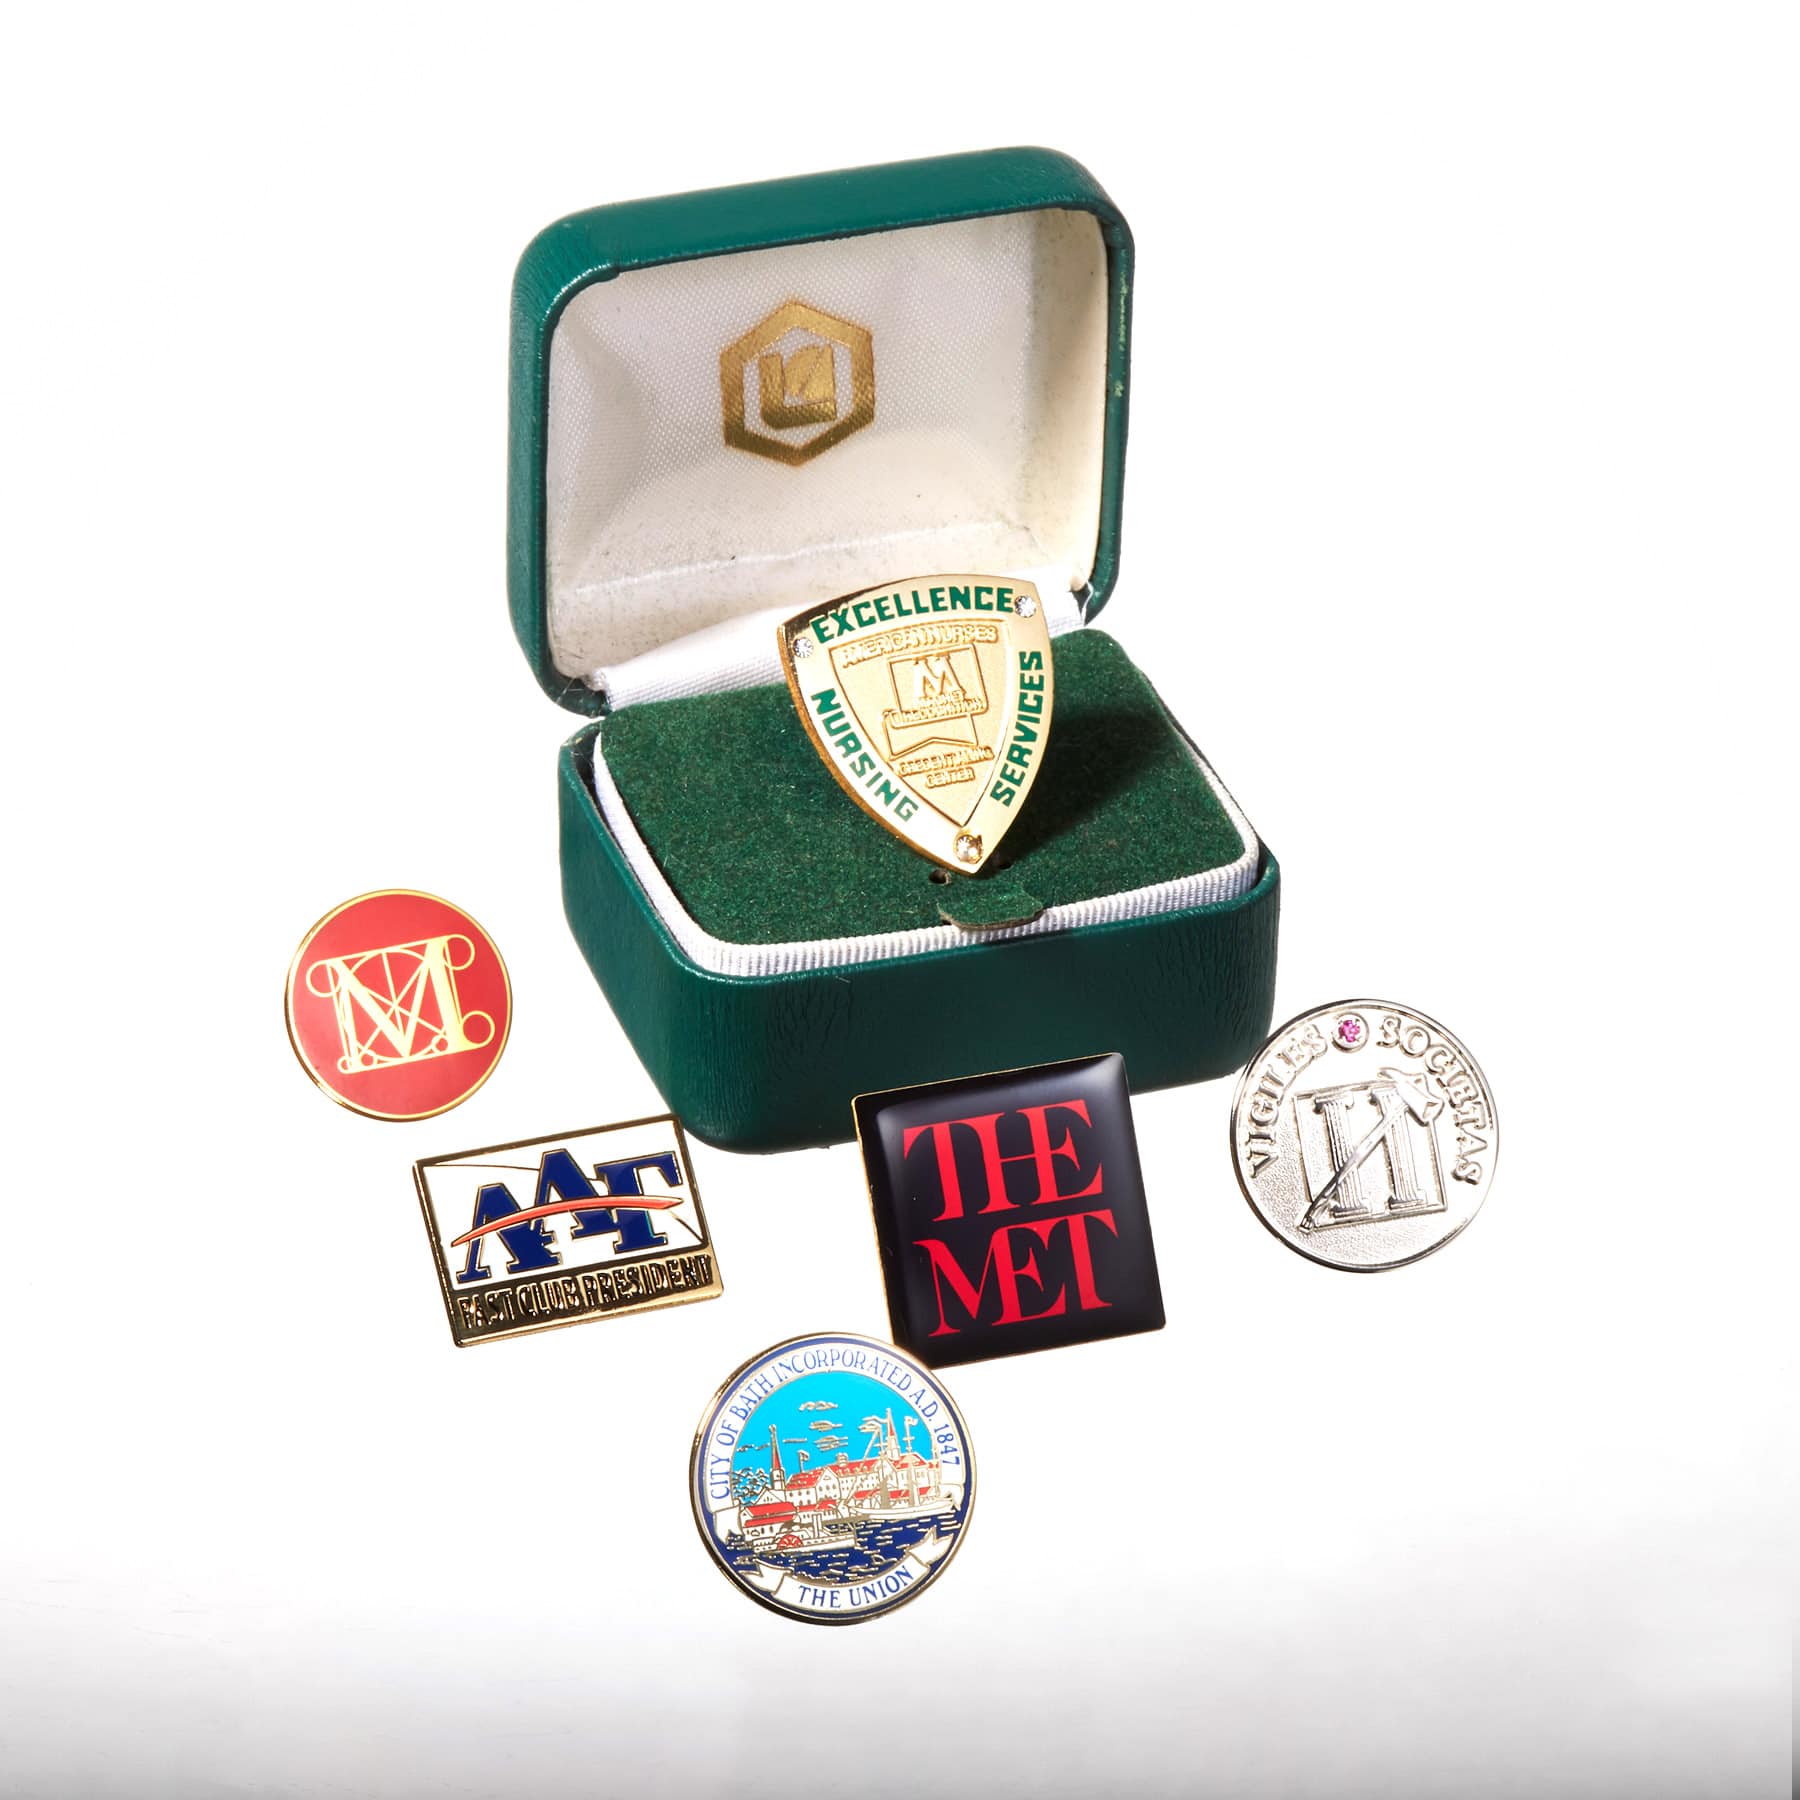 Various Embossed Award Pins in and near a green case